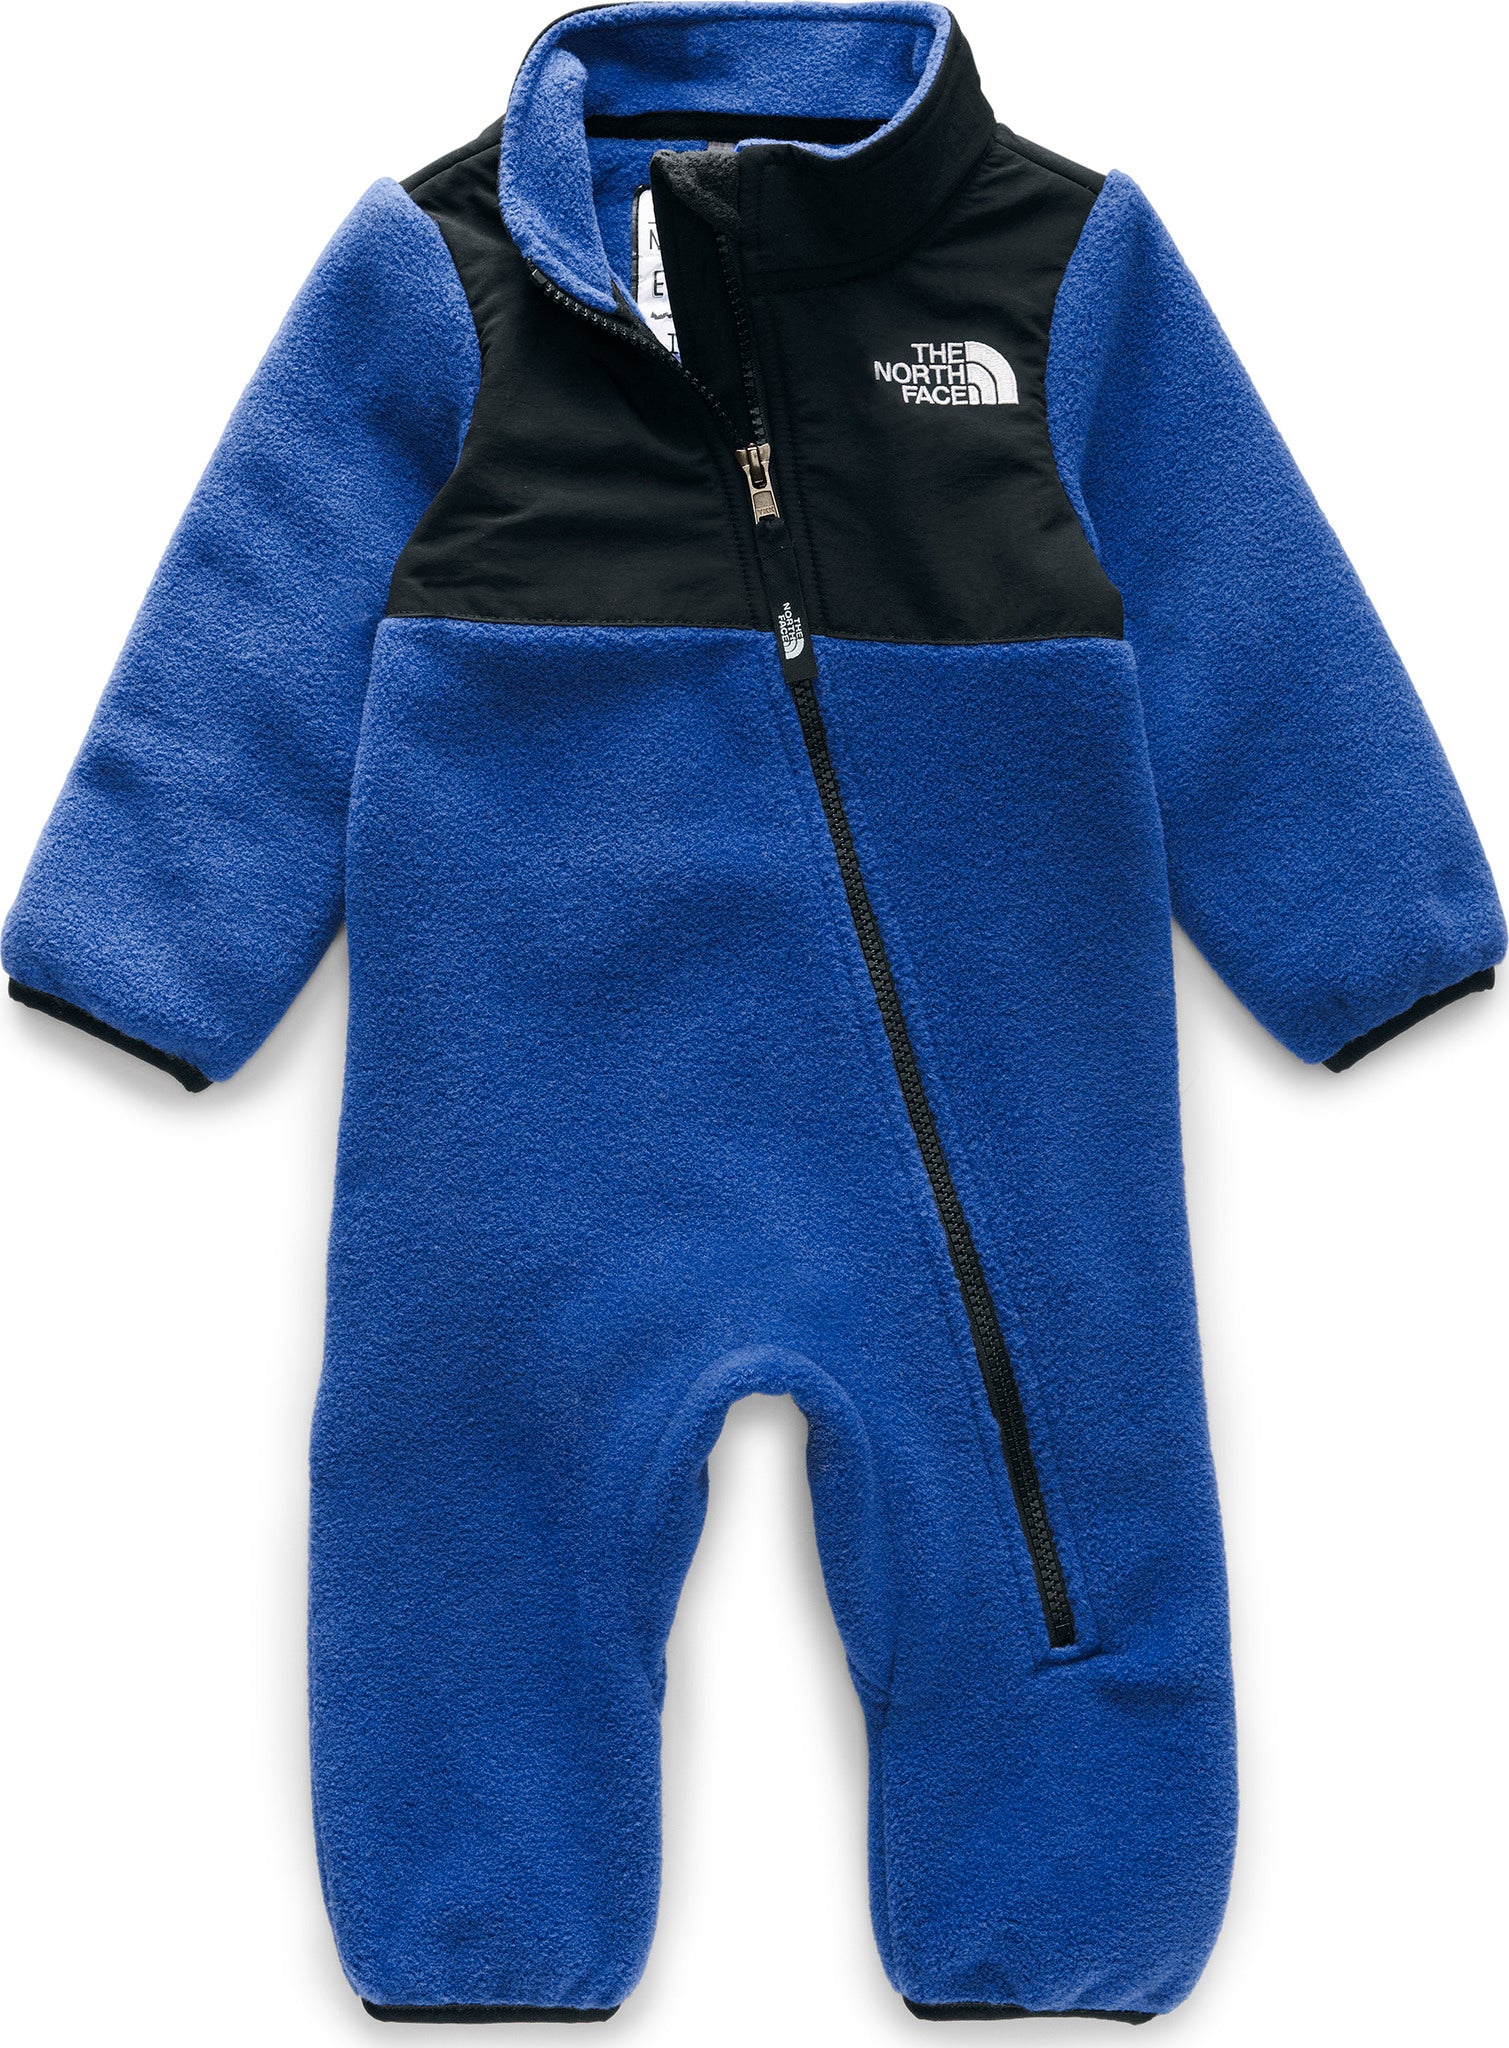 The North Face Denali One-Piece - Infant | Altitude Sports